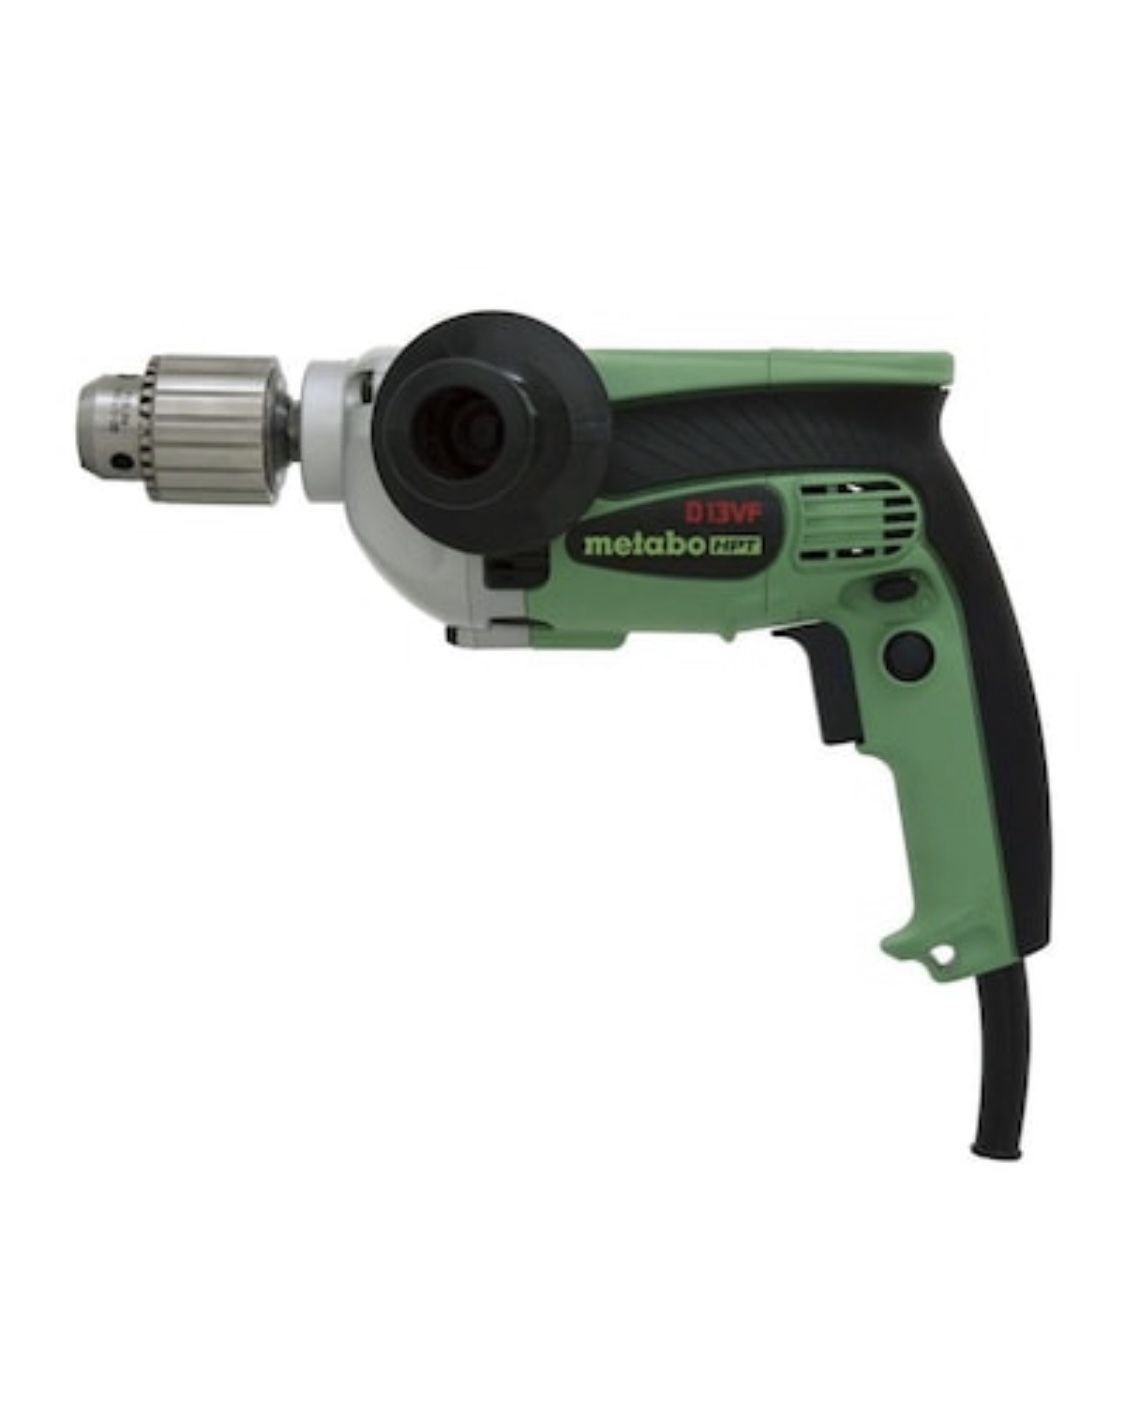 Brand NEW Metabo HPT 9-amp 1/2-in Keyed Corded 13mm Drill